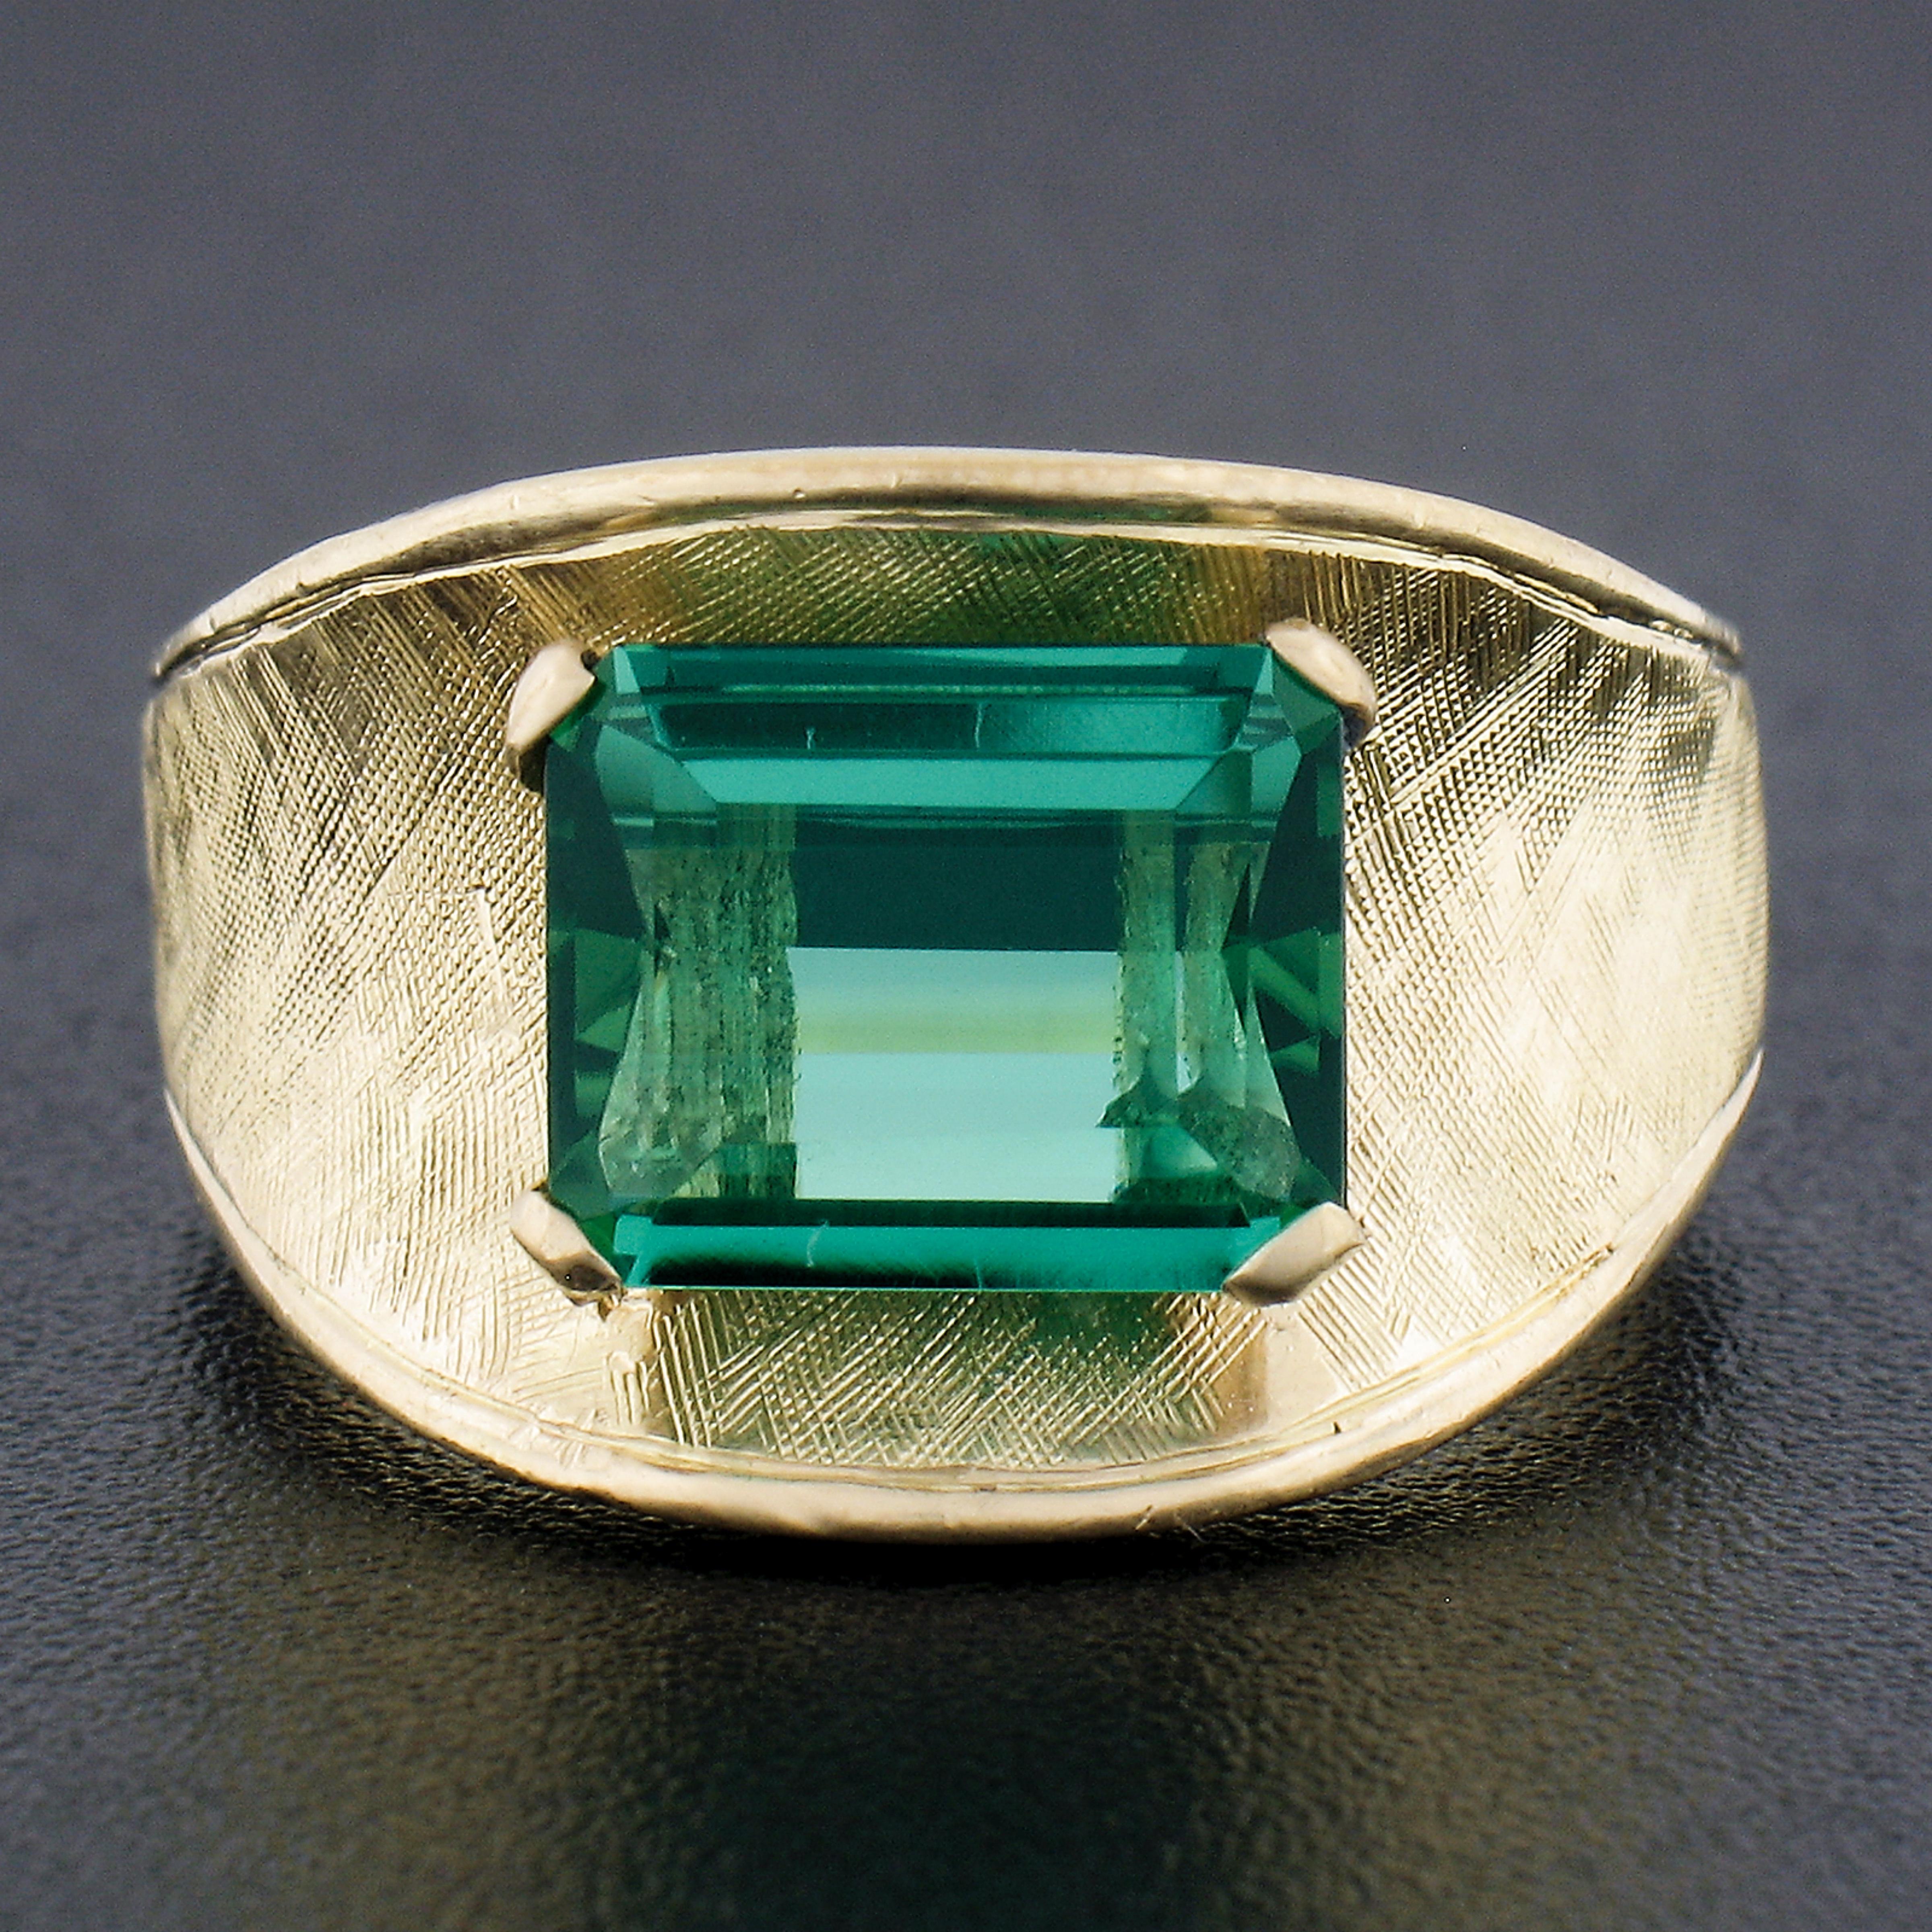 Gorgeous tourmaline! Enjoy!

--Stone(s):--
(1) Natural Genuine Tourmaline - Emerald Cut - Prong Set - Slightly Bluish Green Color - 7.8x9.4mm - 2.50ct (exact)
Total Carat Weight:	2.50 (exact)

Material: Solid 18k Yellow Gold
Weight: 11.41 Grams
Ring